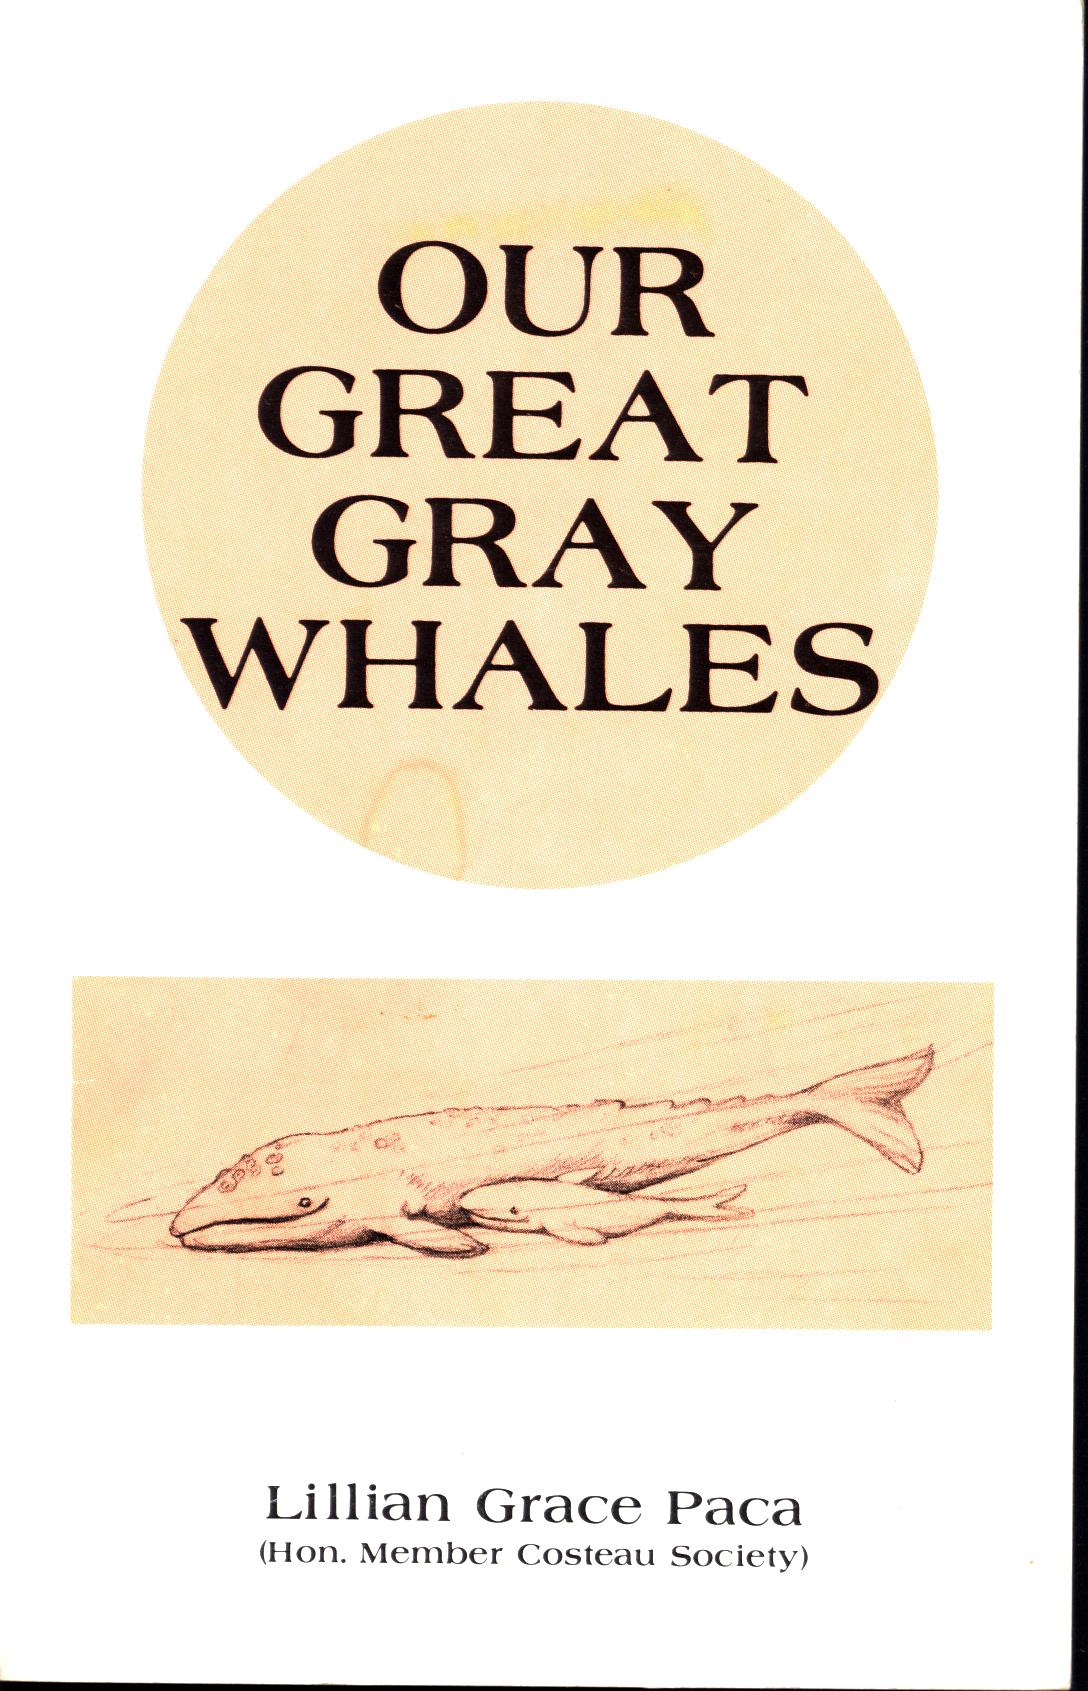 OUR GREAT GRAY WHALES.